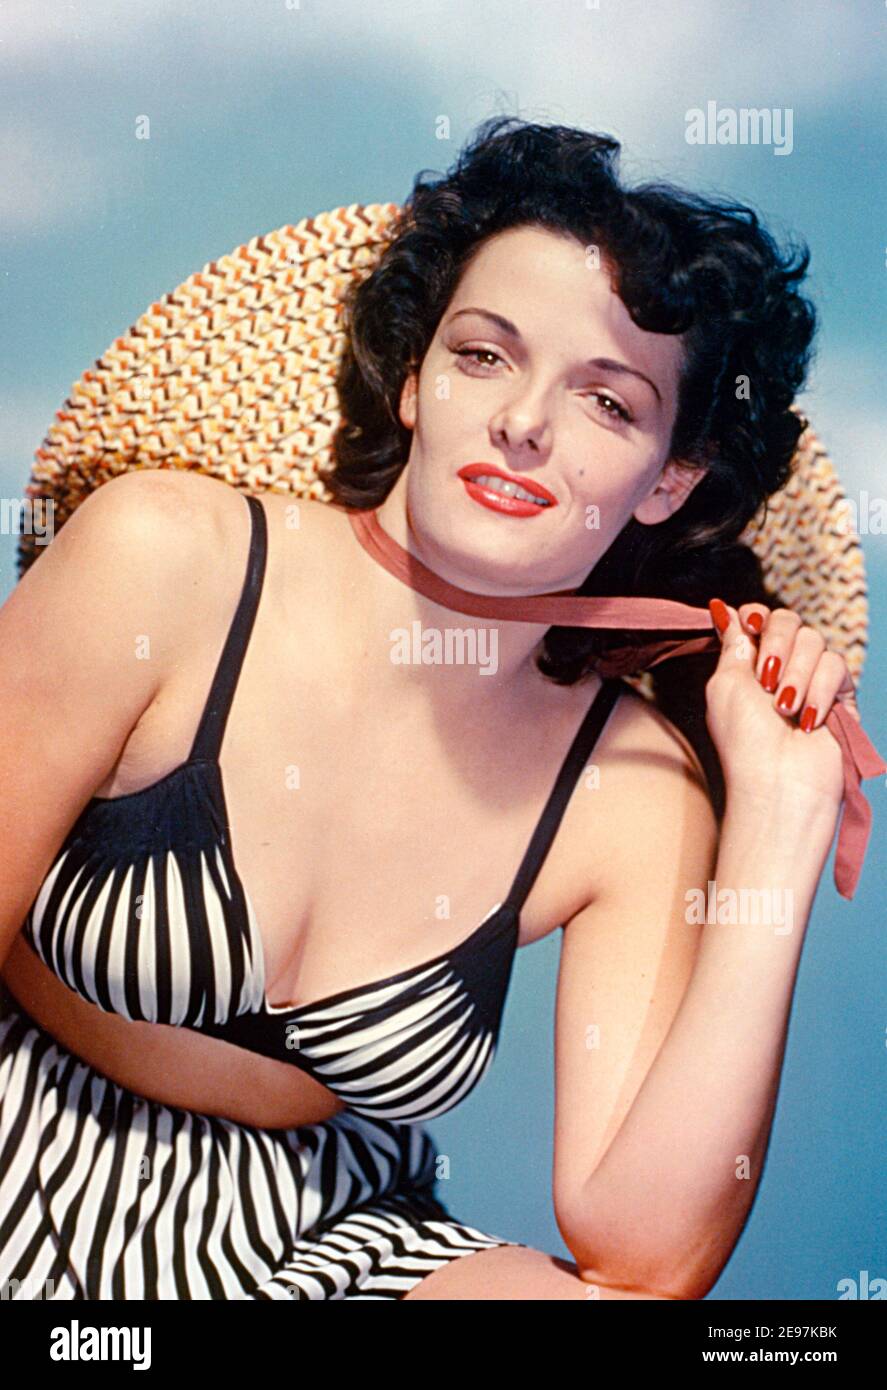 Jane Russell An American Actress Known As One Of Hollywoods Leading Sex Symbols In The 1940s